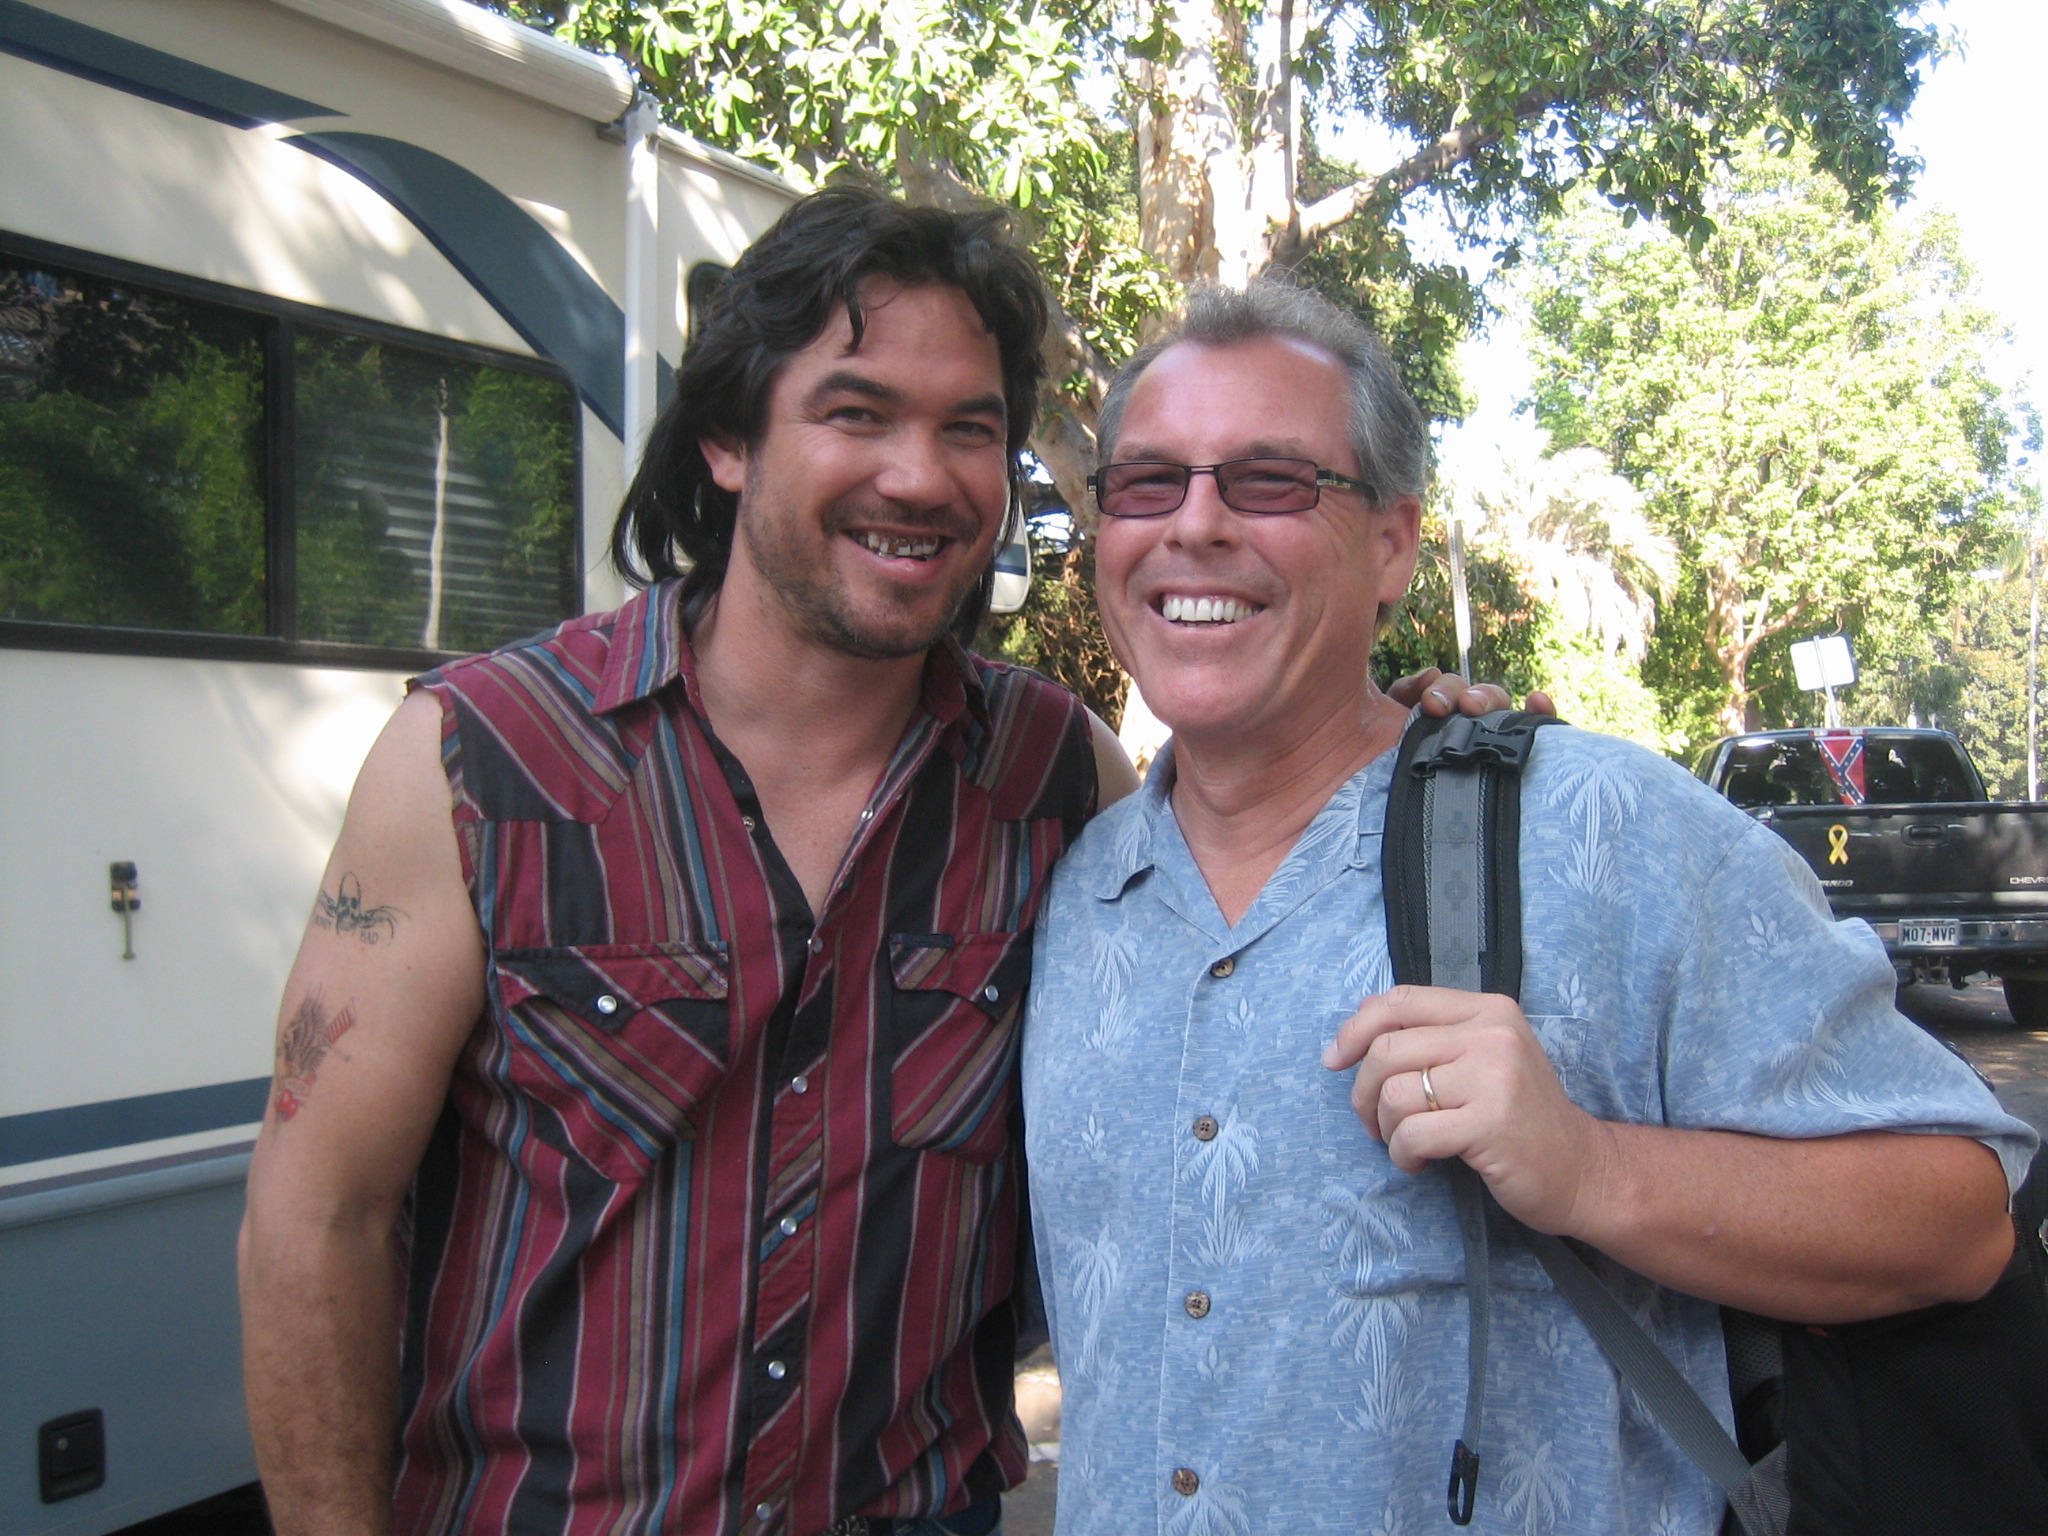 Dean Cain & Mark Maine on the set of Hole in One